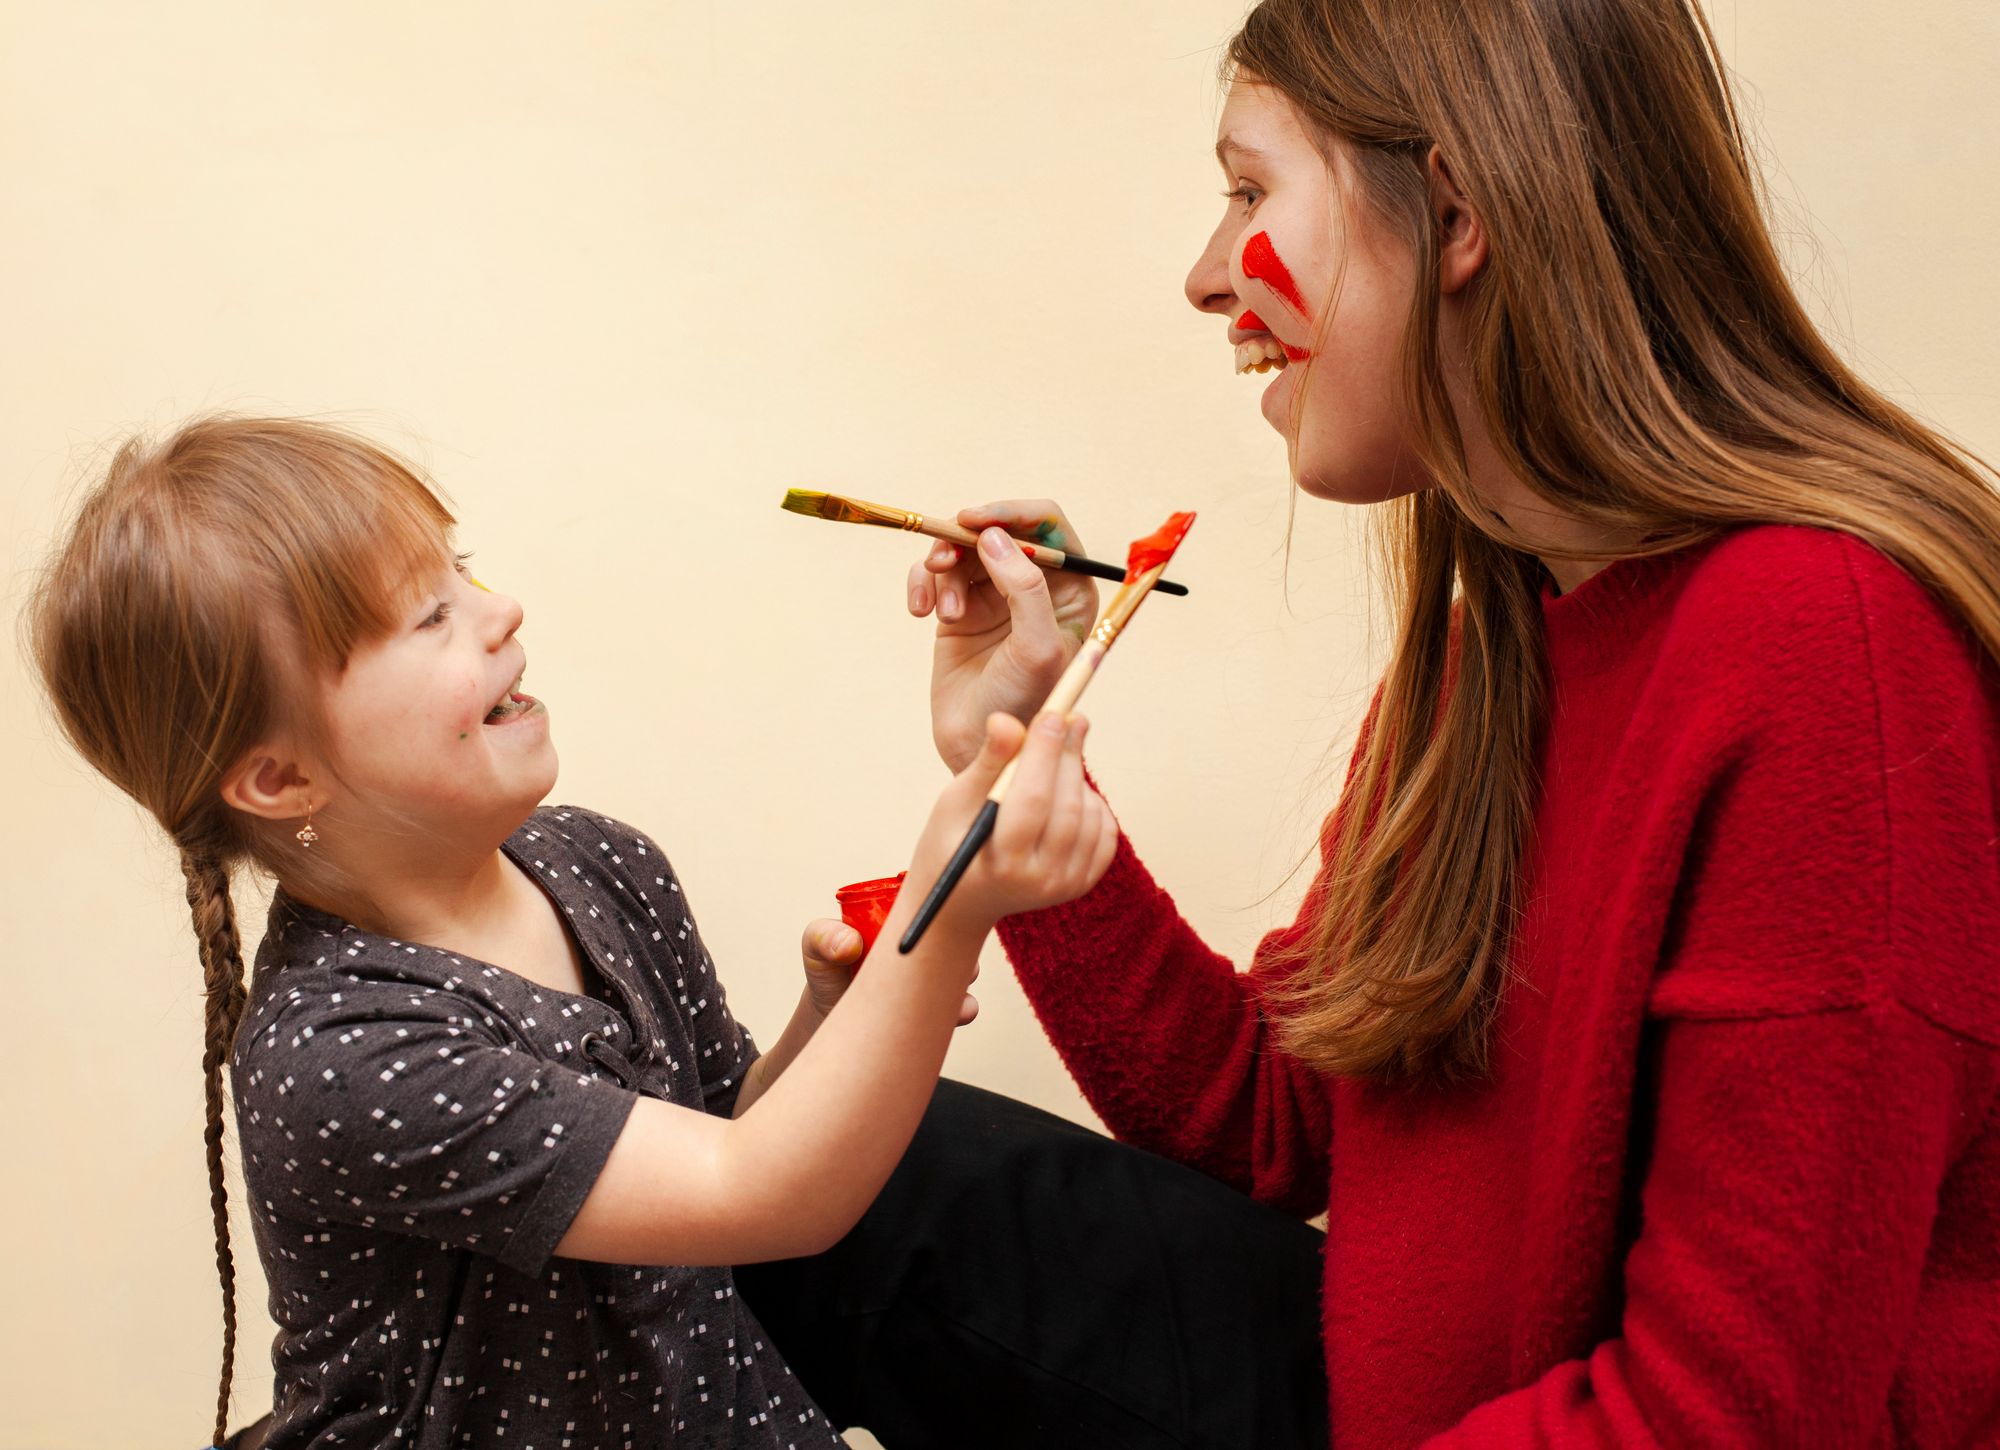 happy-woman-girl-with-down-syndrome-painting-each-other-s-faces